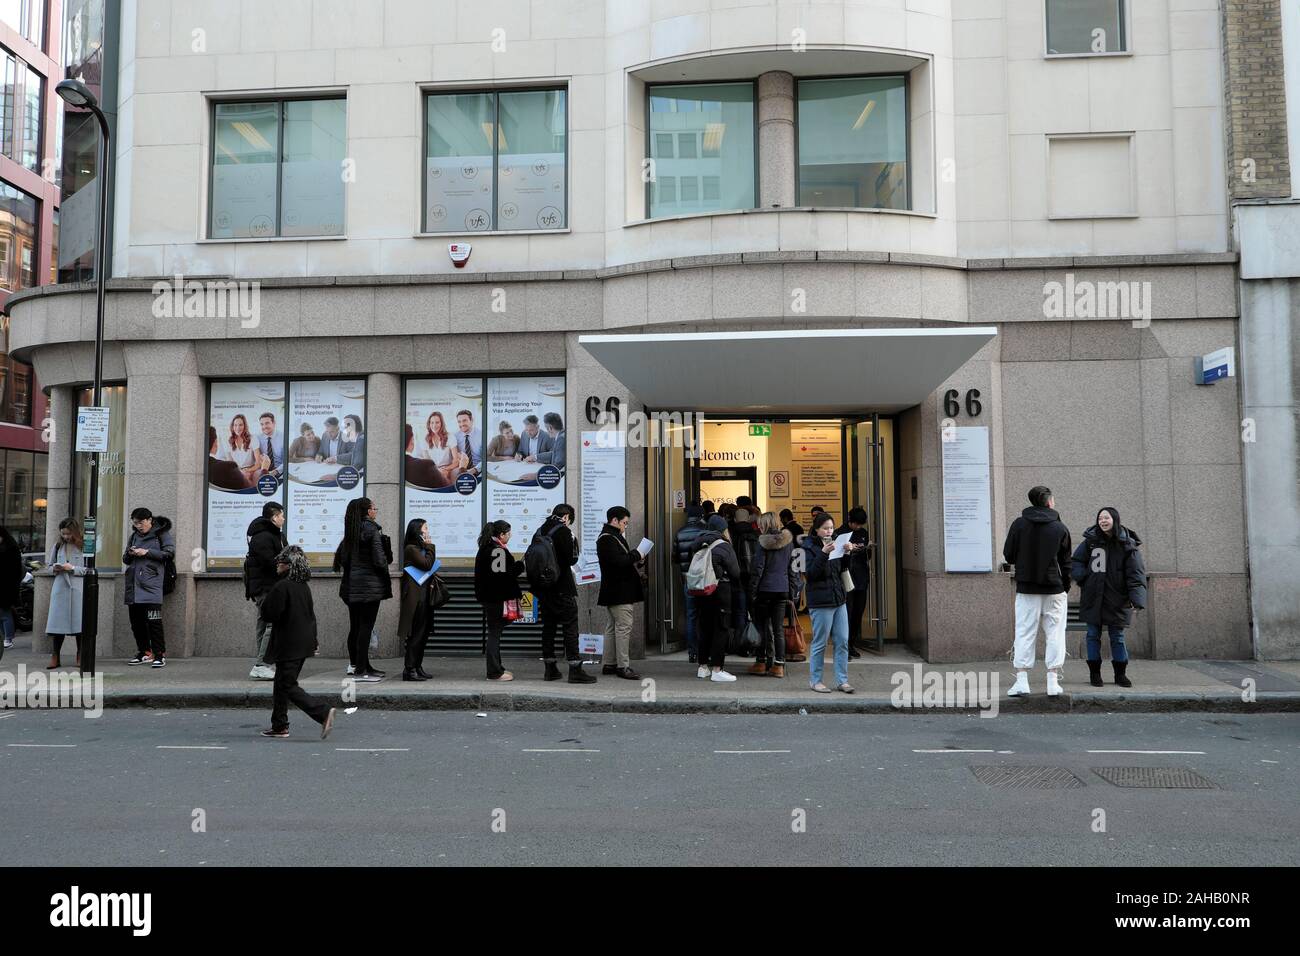 People queueing up standing outside the Canada Visa Application Centre Office in Wilson Street Finsbury East London EC2 England UK  KATHY DEWITT Stock Photo